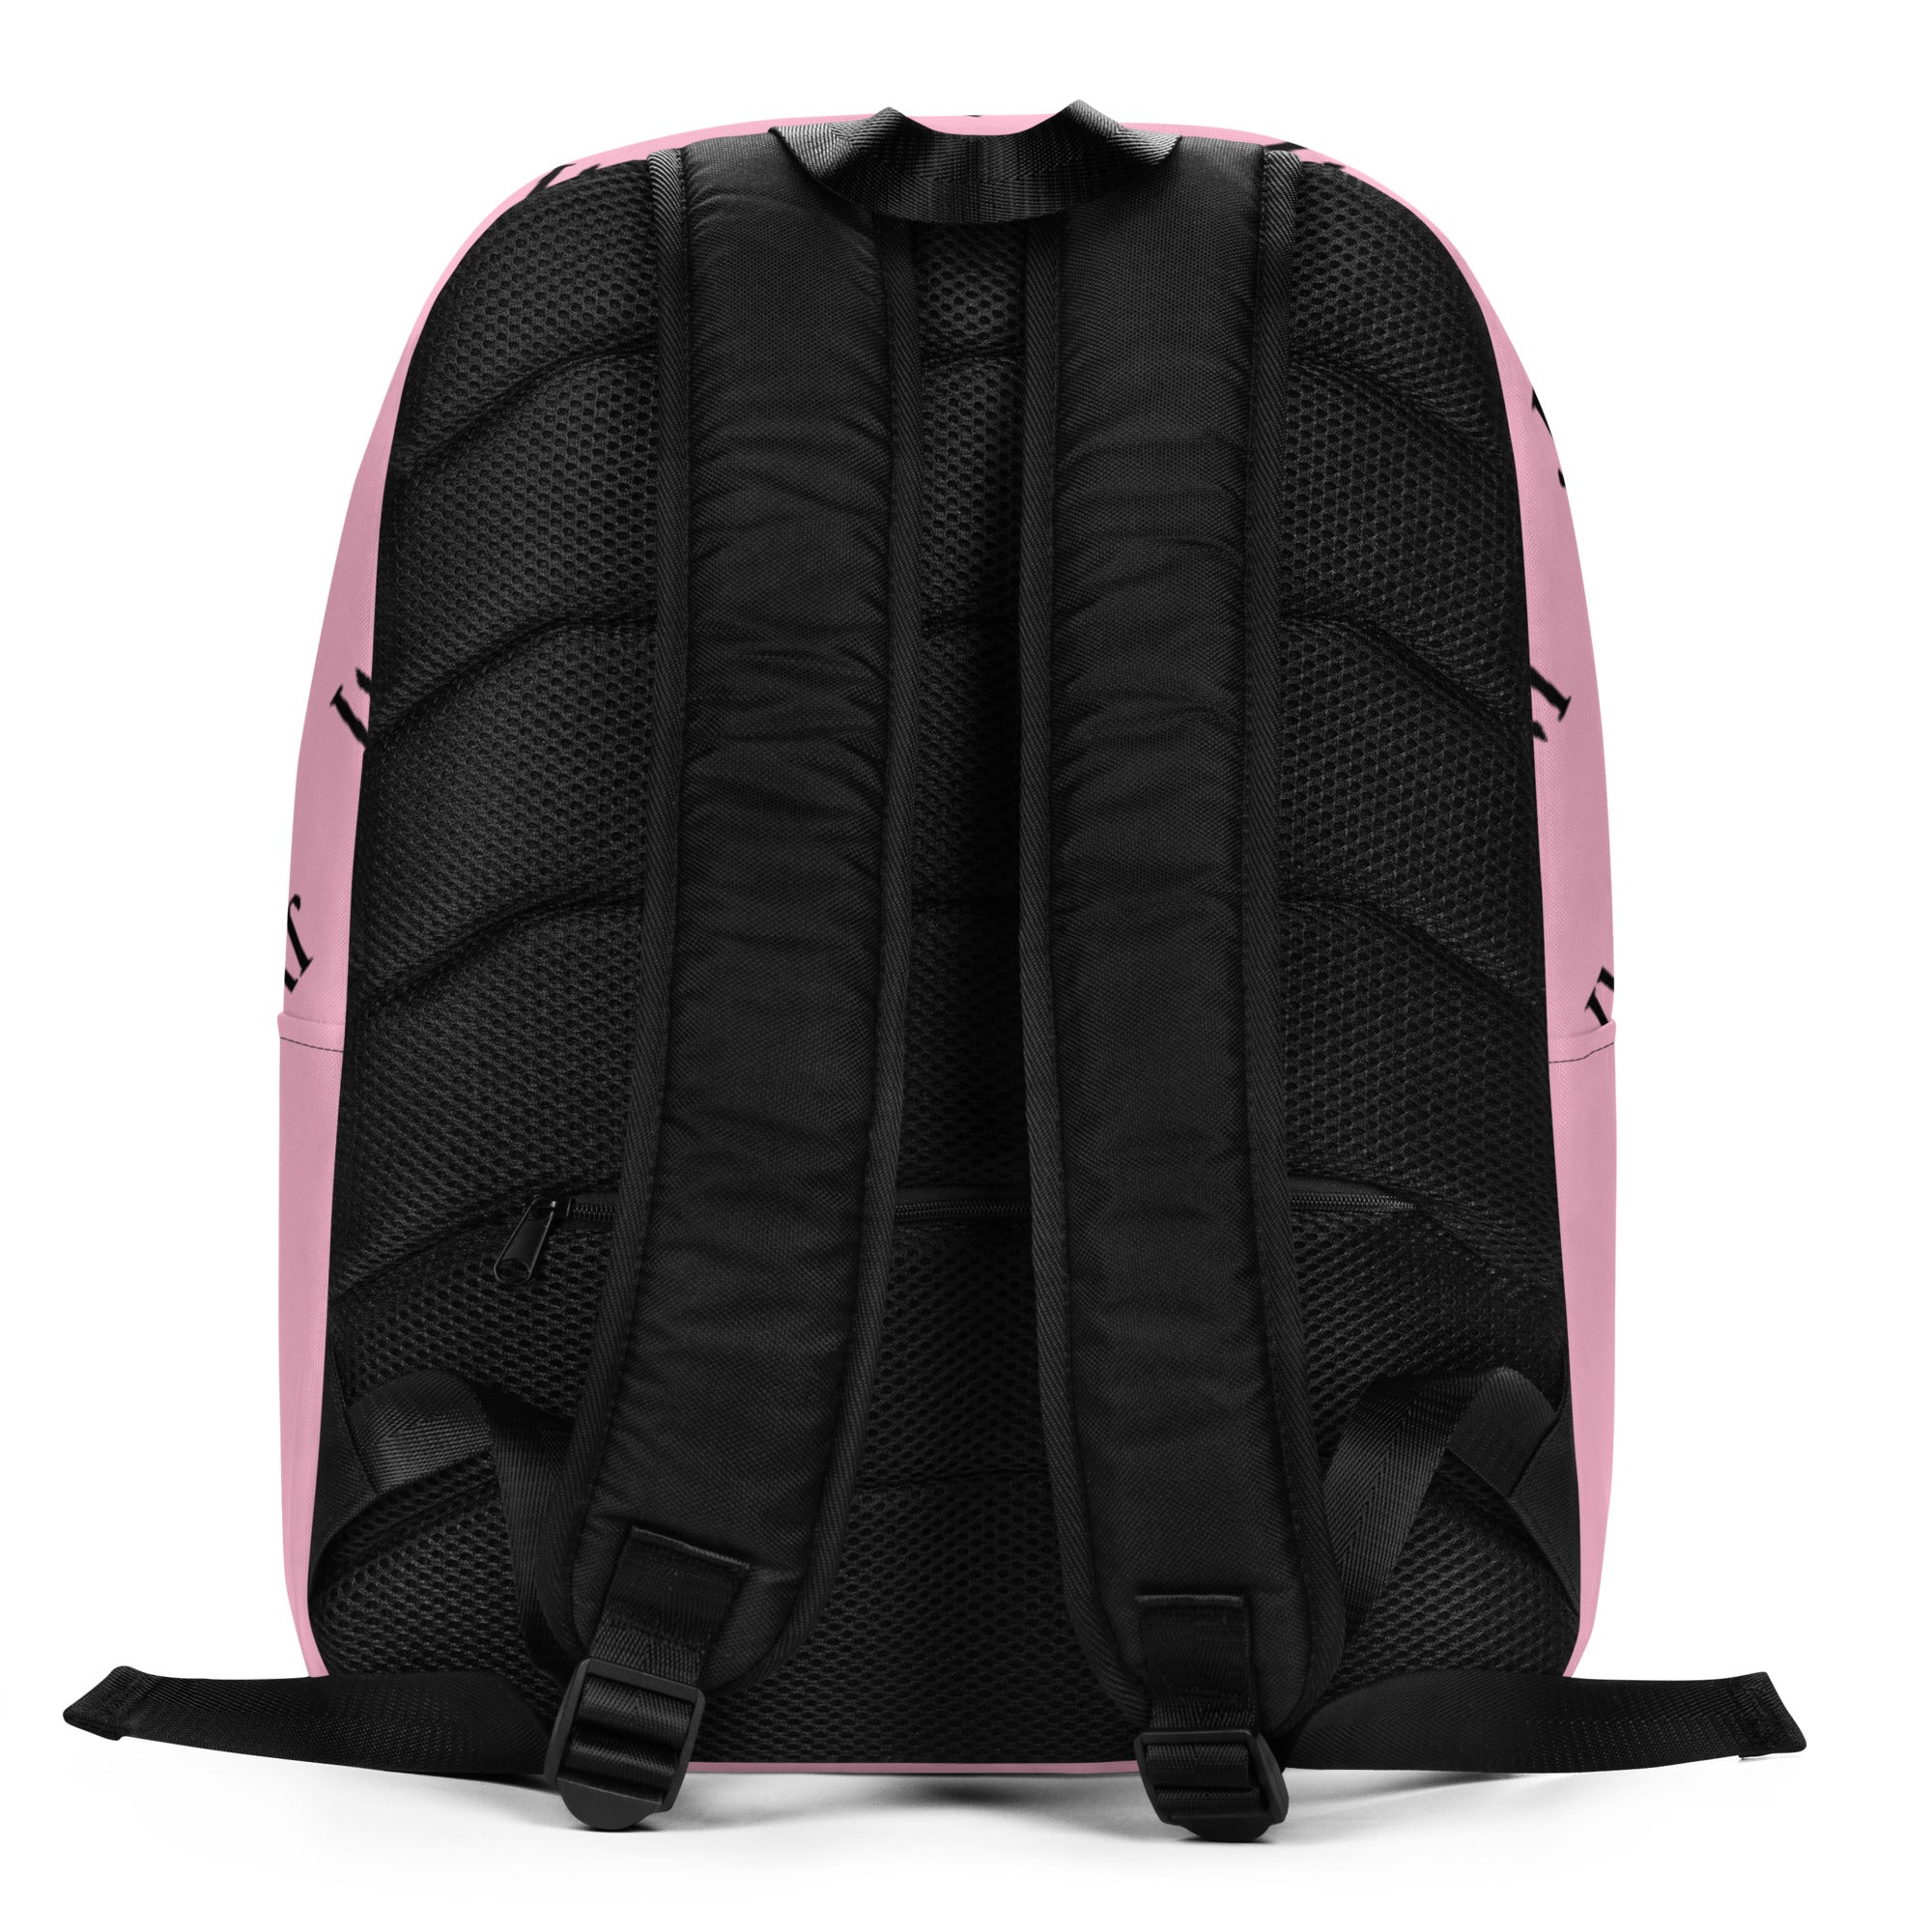 The Hustle Is In You. Dura-Light Backpack